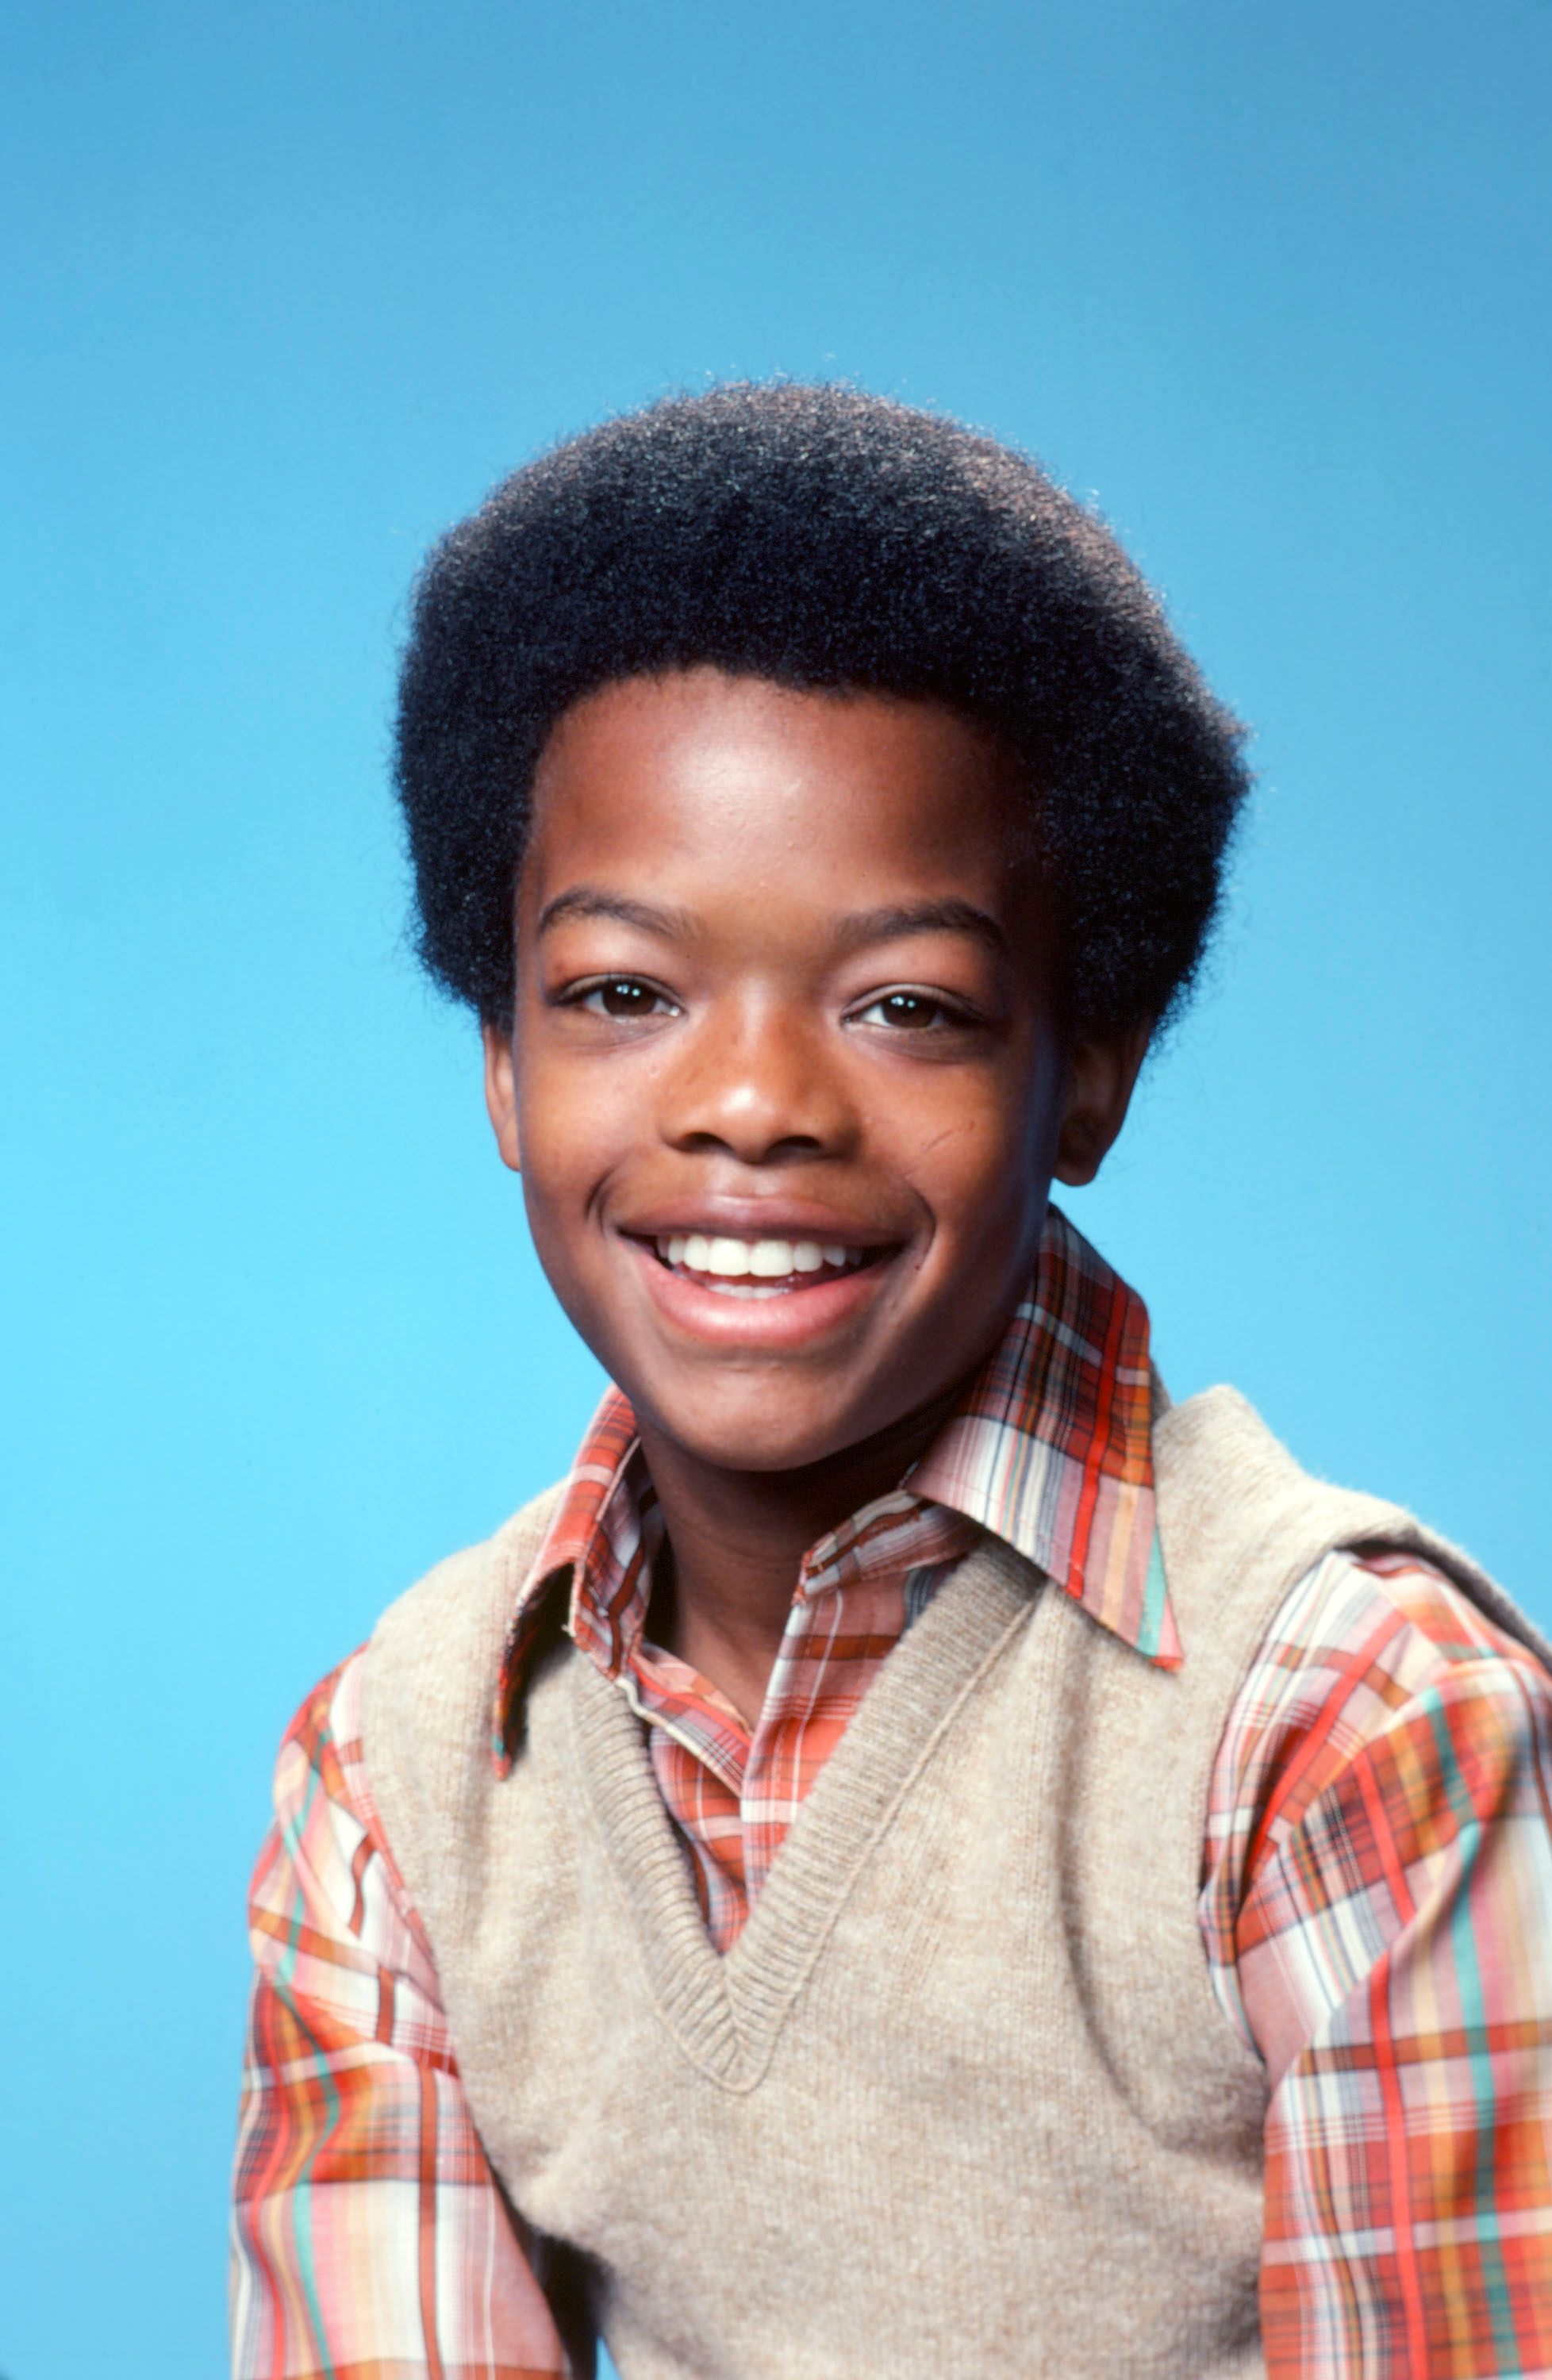 Todd Bridges as Willis Jackson on season 2 of "Diff'rent Strokes" | Photo: Herb Ball/NBCU Photo Bank/NBCUniversal/Getty Images